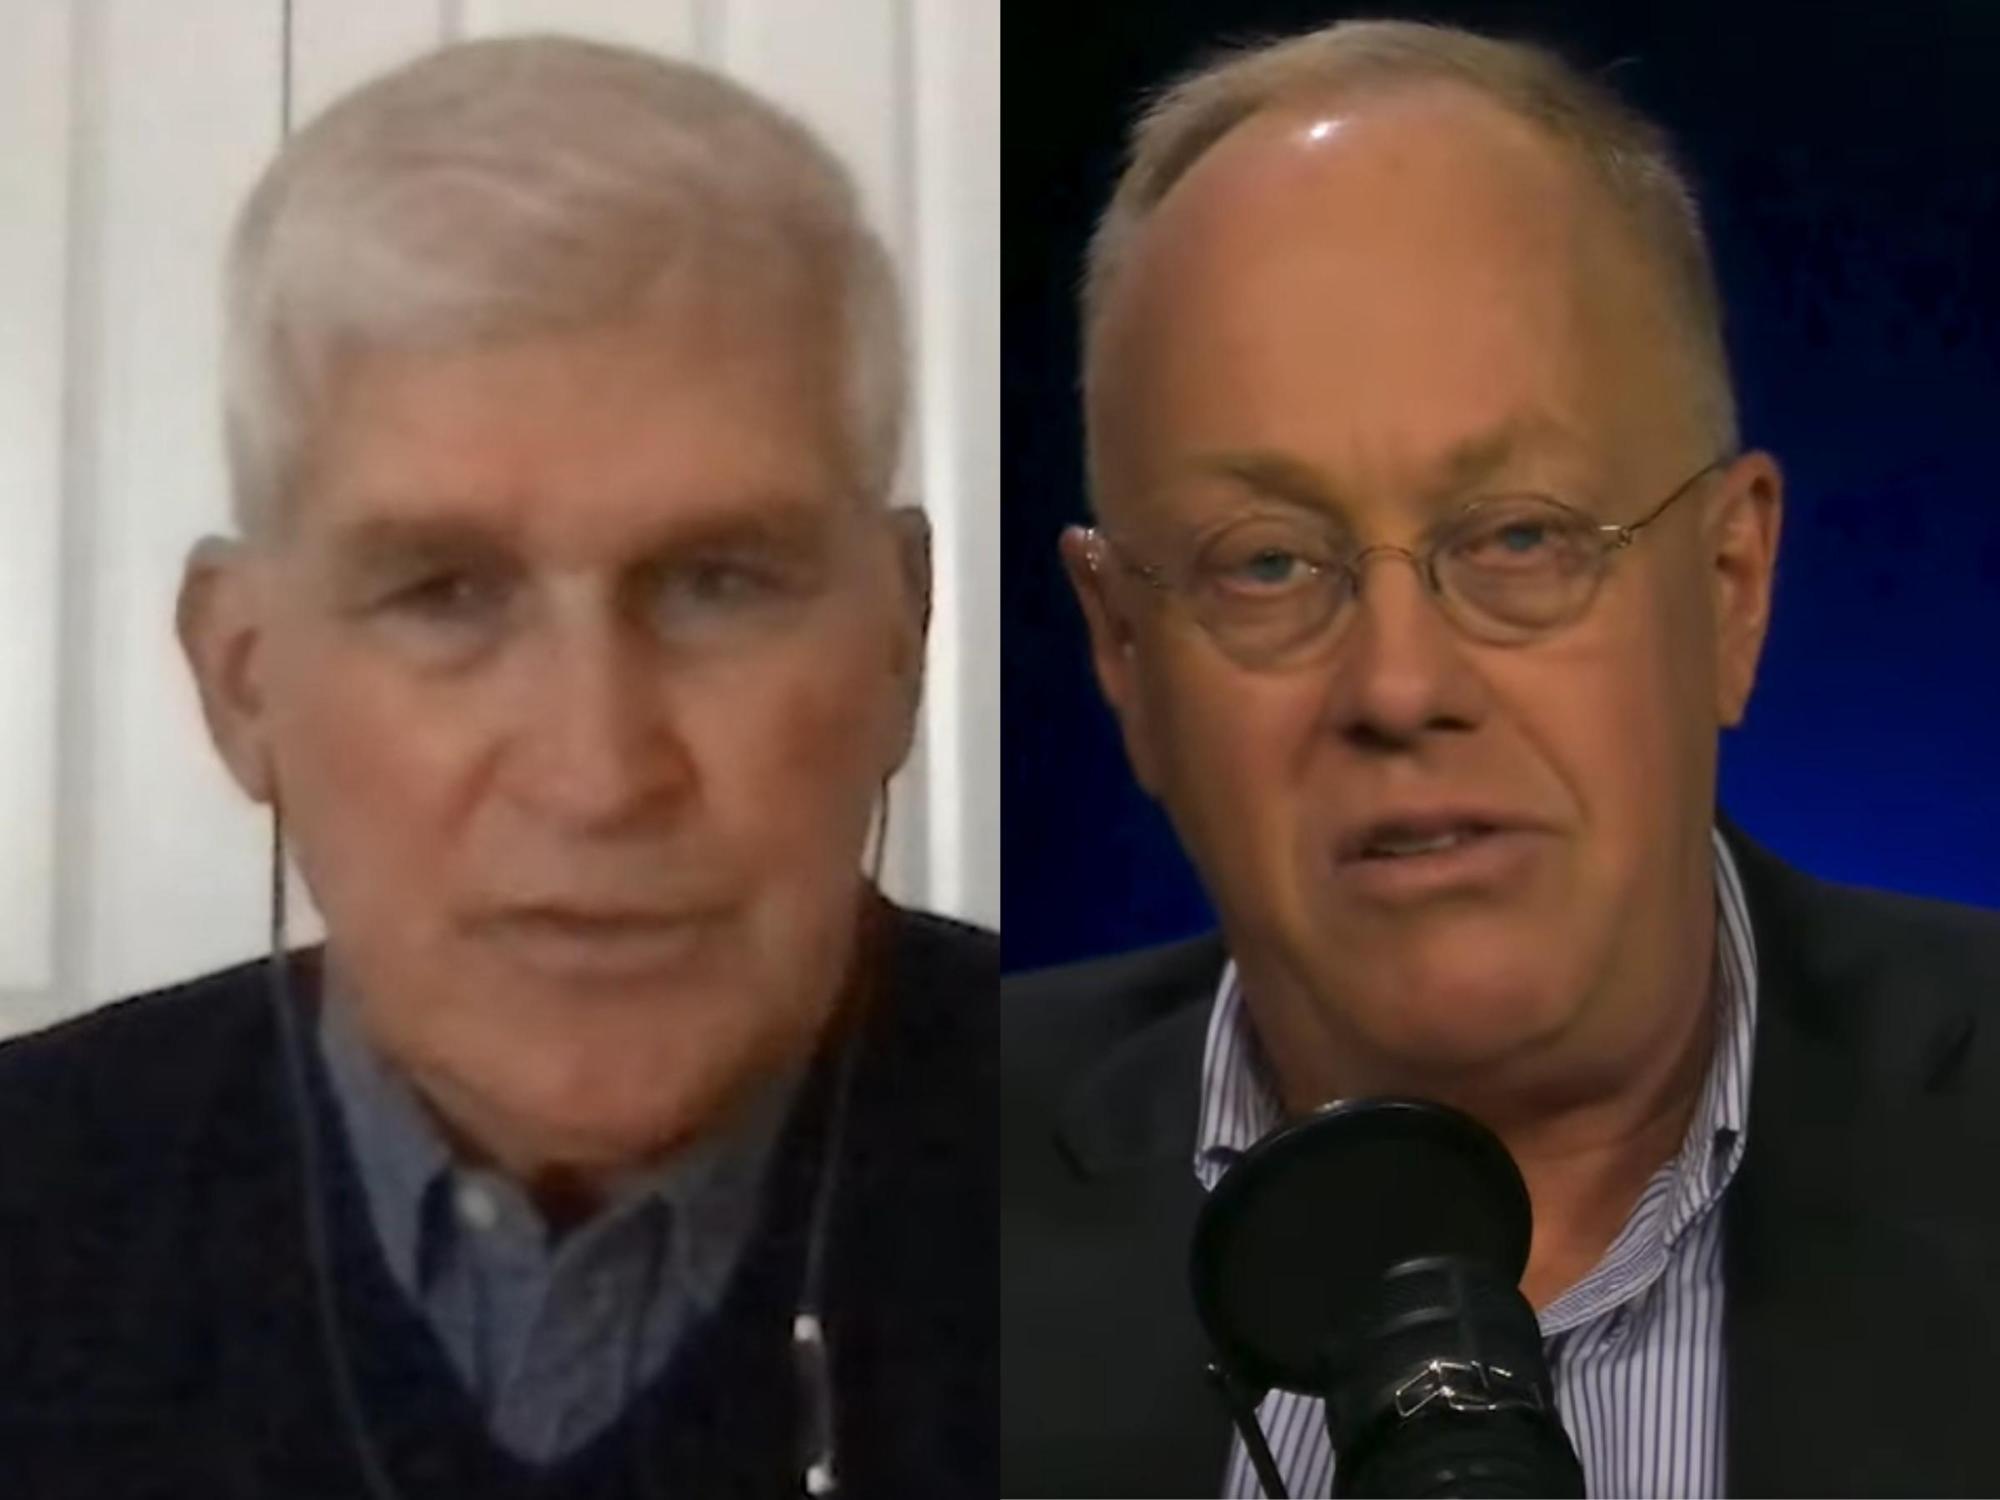 Screenshot of Andrew Bacevich and Chris Hedges.